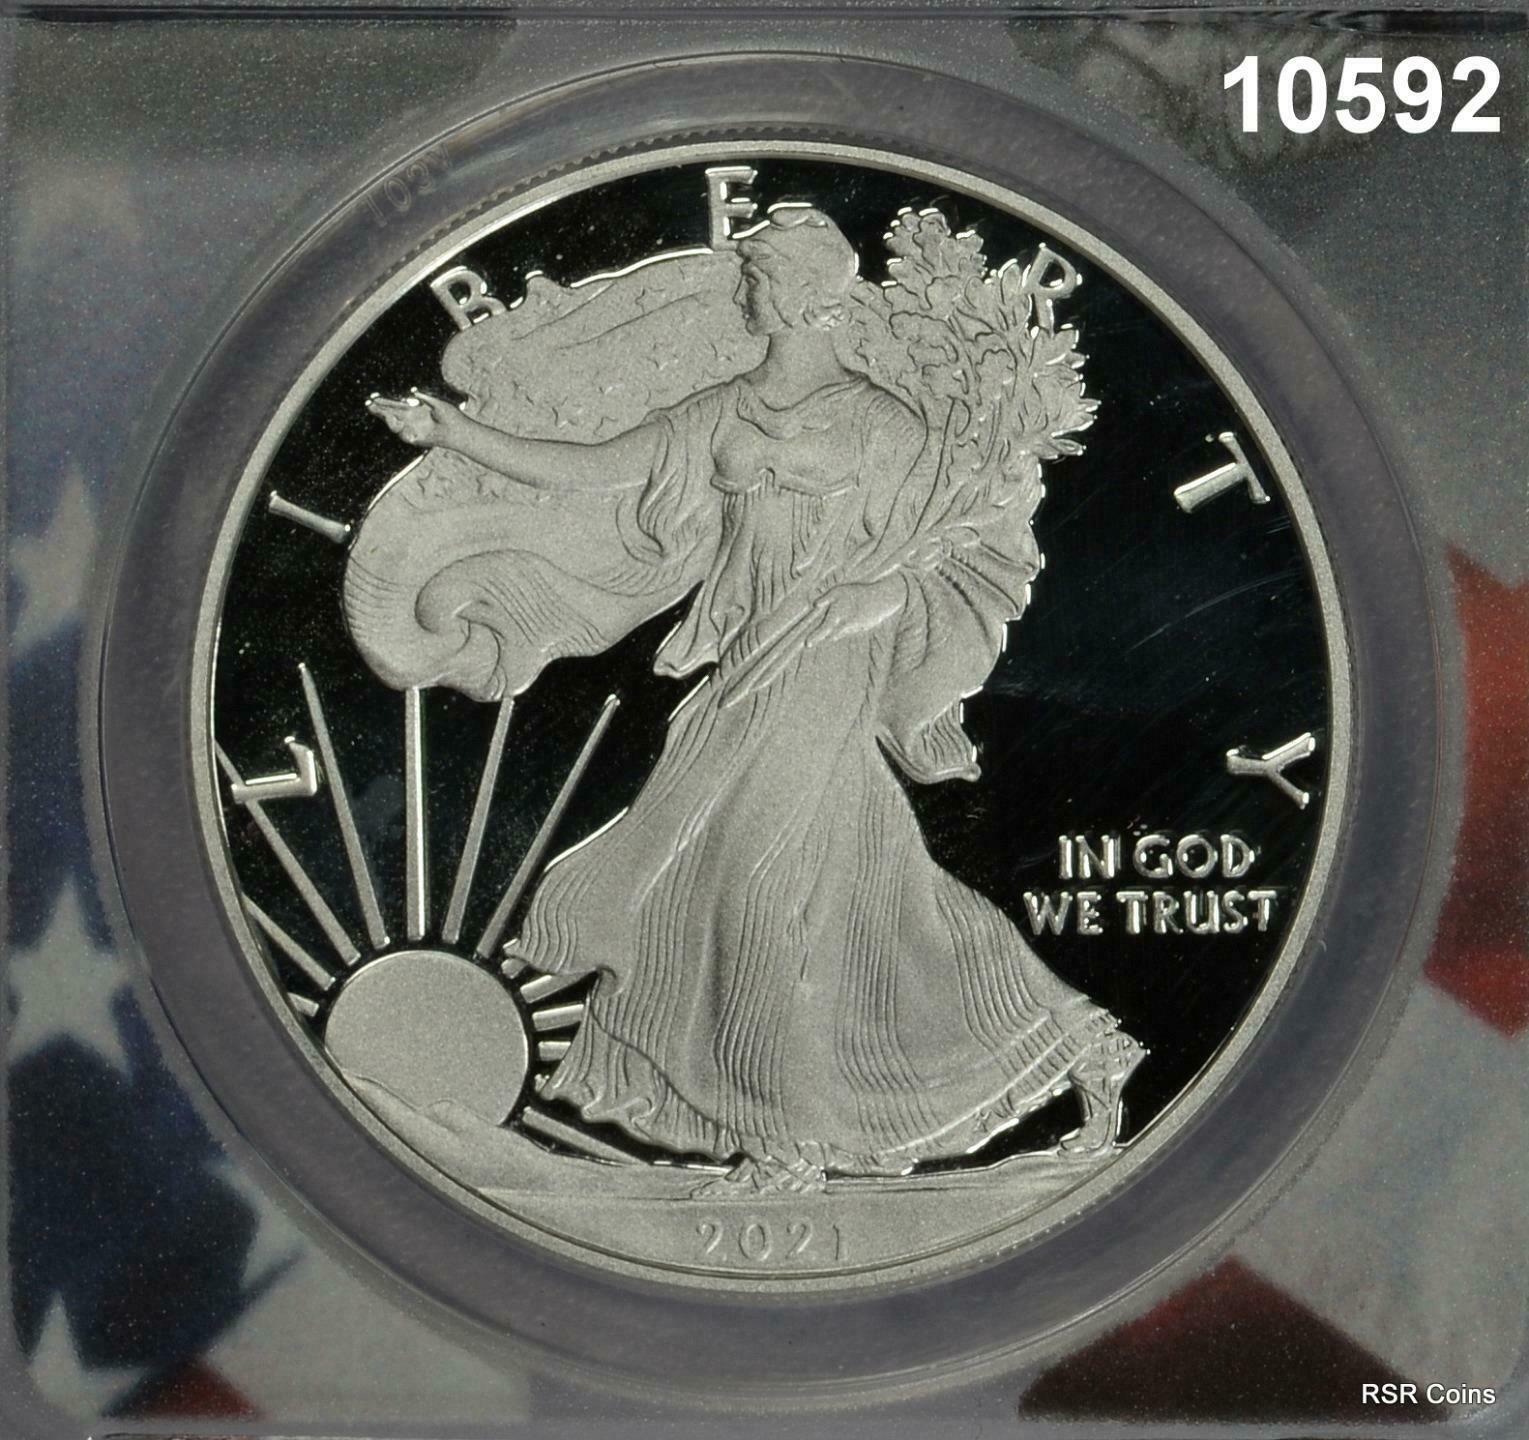 2021 W SILVER EAGLE ANACS CERTIFIED TYPE 1 PR70 DCAM FIRST STRIKE PERFECT!#10592